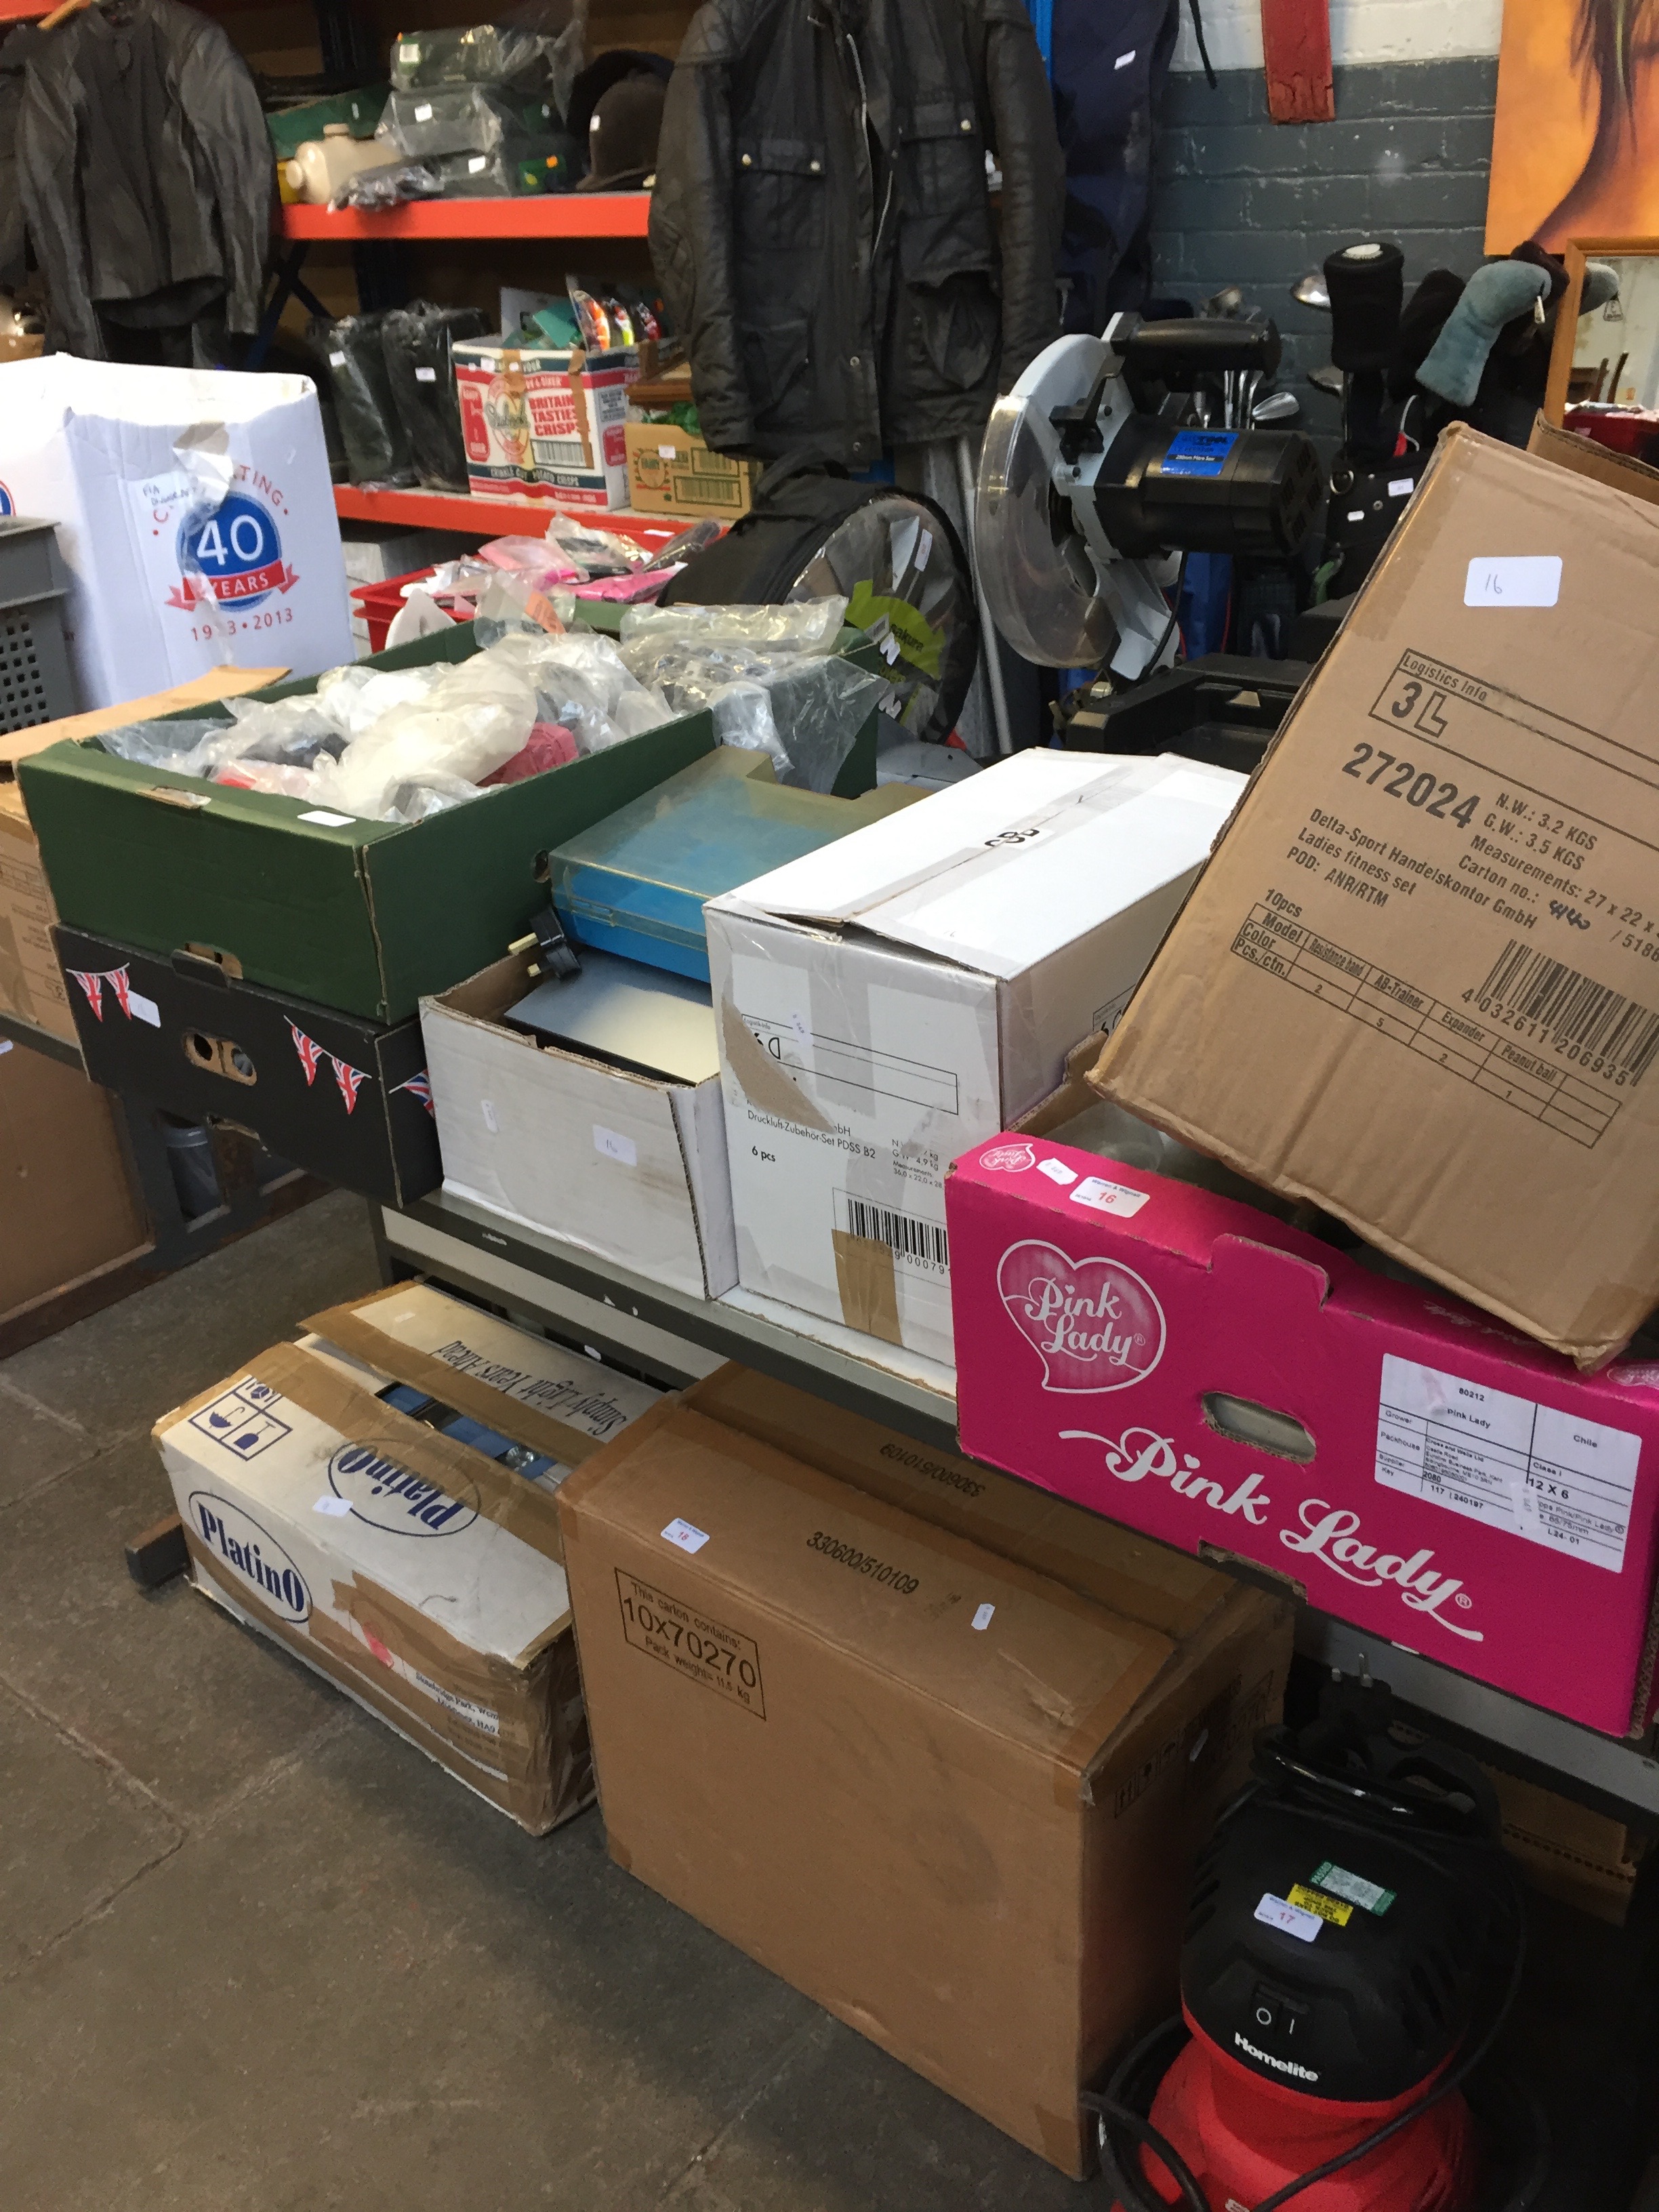 APPROX. 7 BOXES OF VARIOUS ELECTRICAL AND PLUMBING FITTINGS